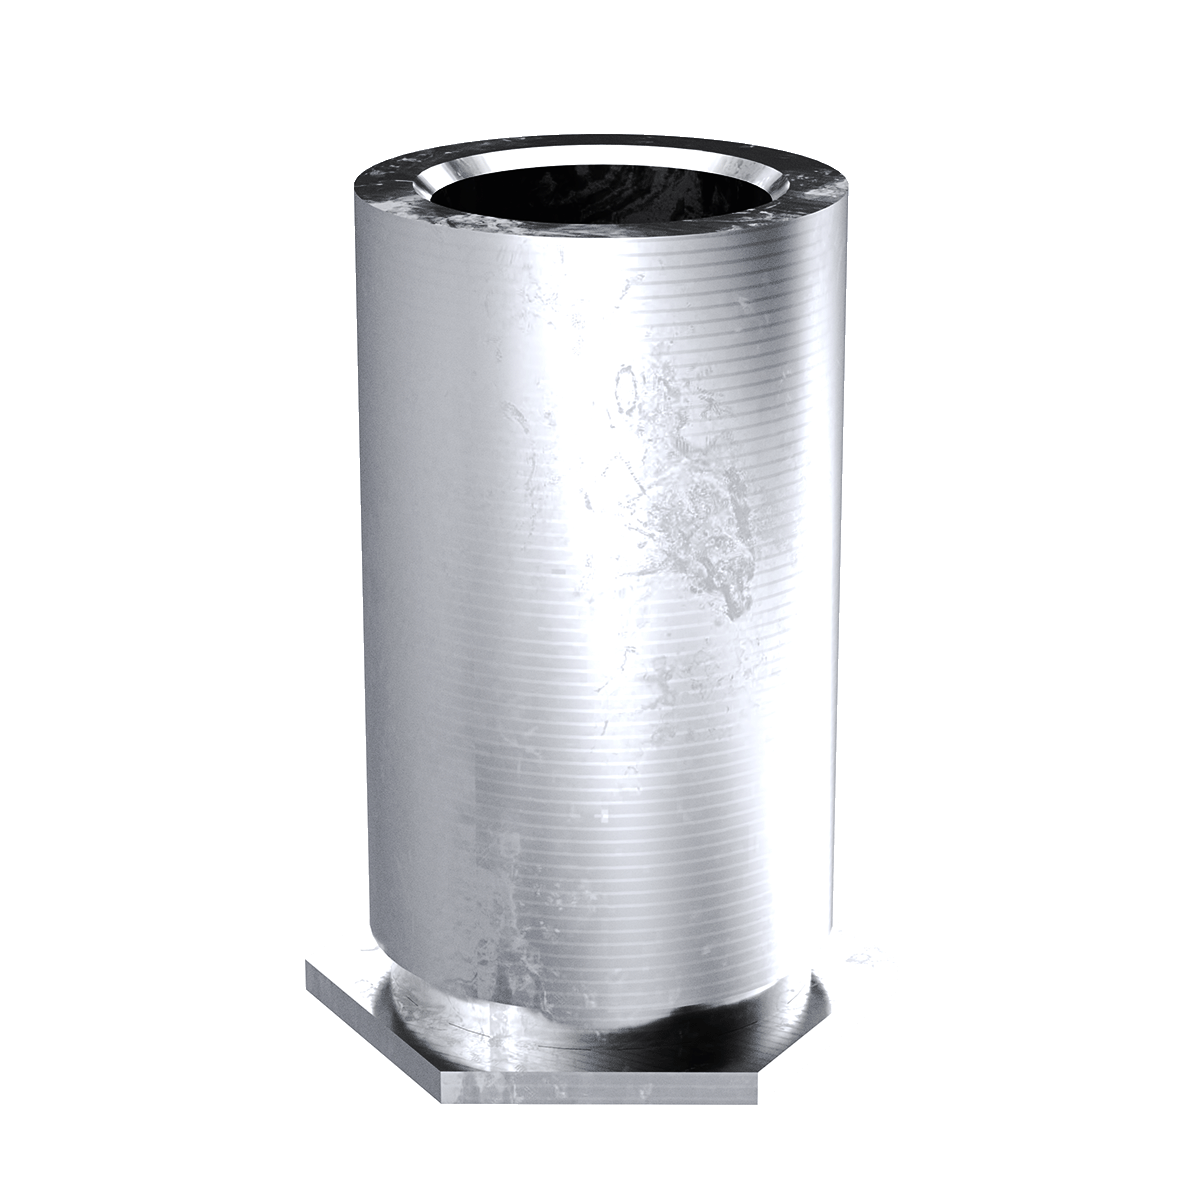 Self-Clinching Standoff, Through Unthreaded, 300 Series Stainless Steel, Passivated, 0.169 x 0.375, 100 Pack